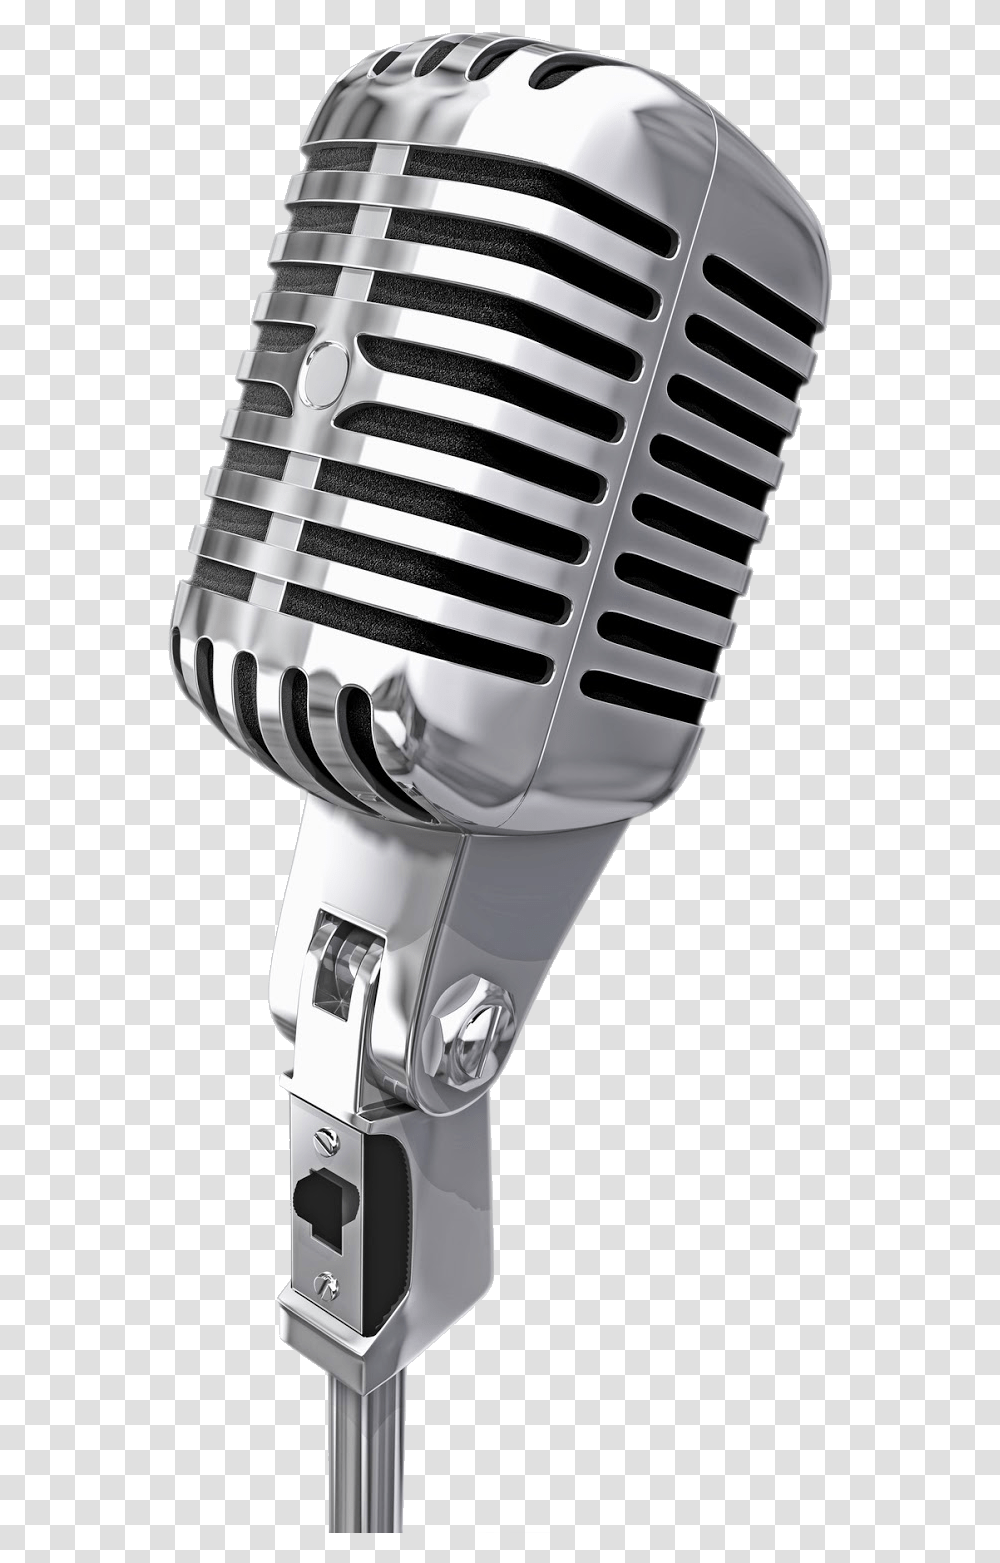 Microphone Image Download Microphone, Helmet, Clothing, Apparel, Electrical Device Transparent Png